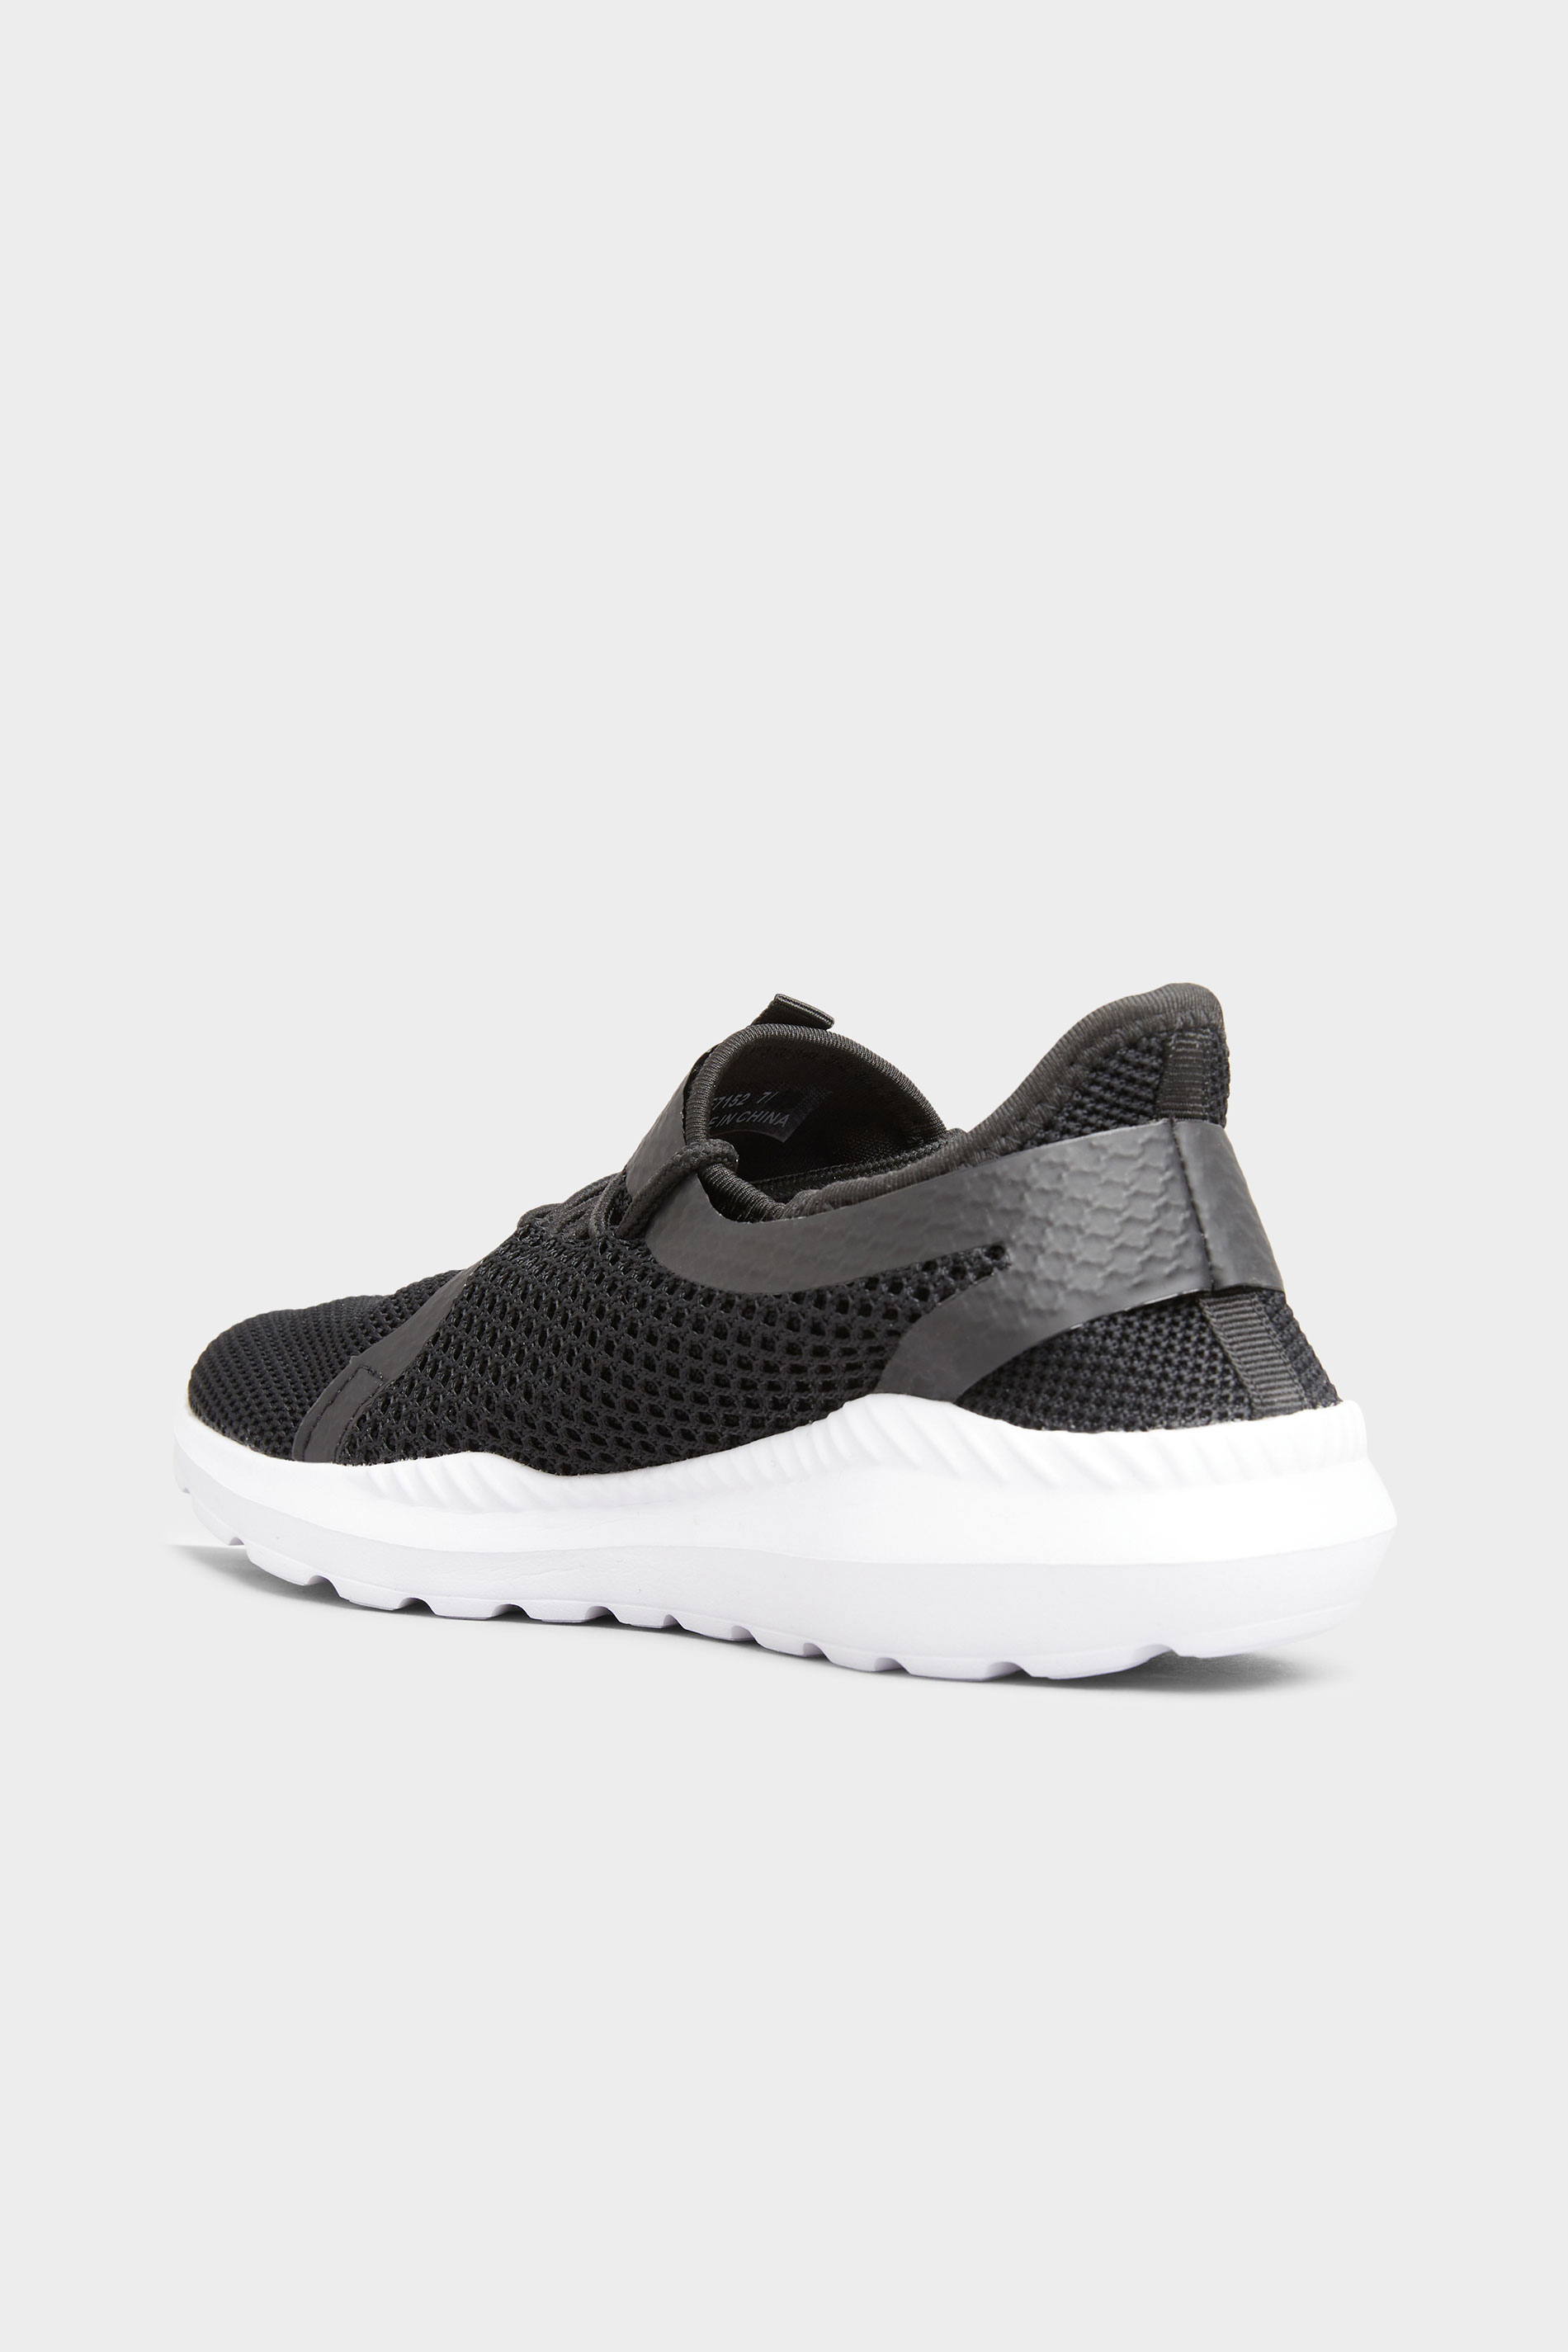 Black Knitted Mesh Trainers In Standard D Fit | Long Tall Sally